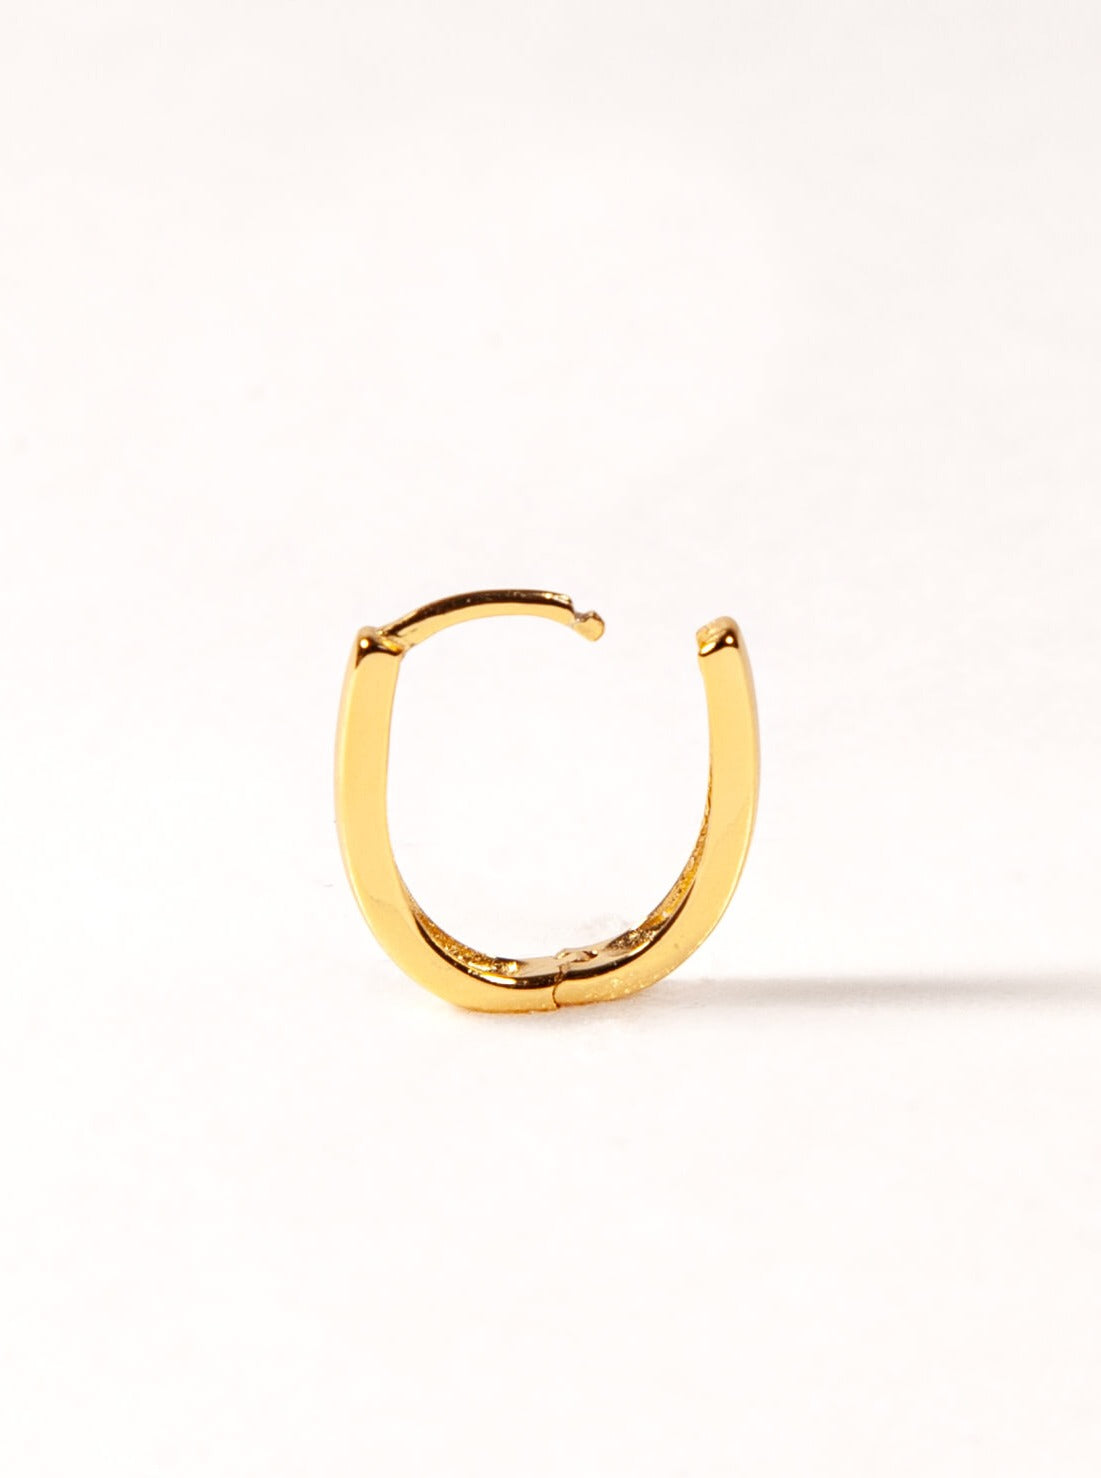 Oval Huggies in 14K Gold over Sterling Silver